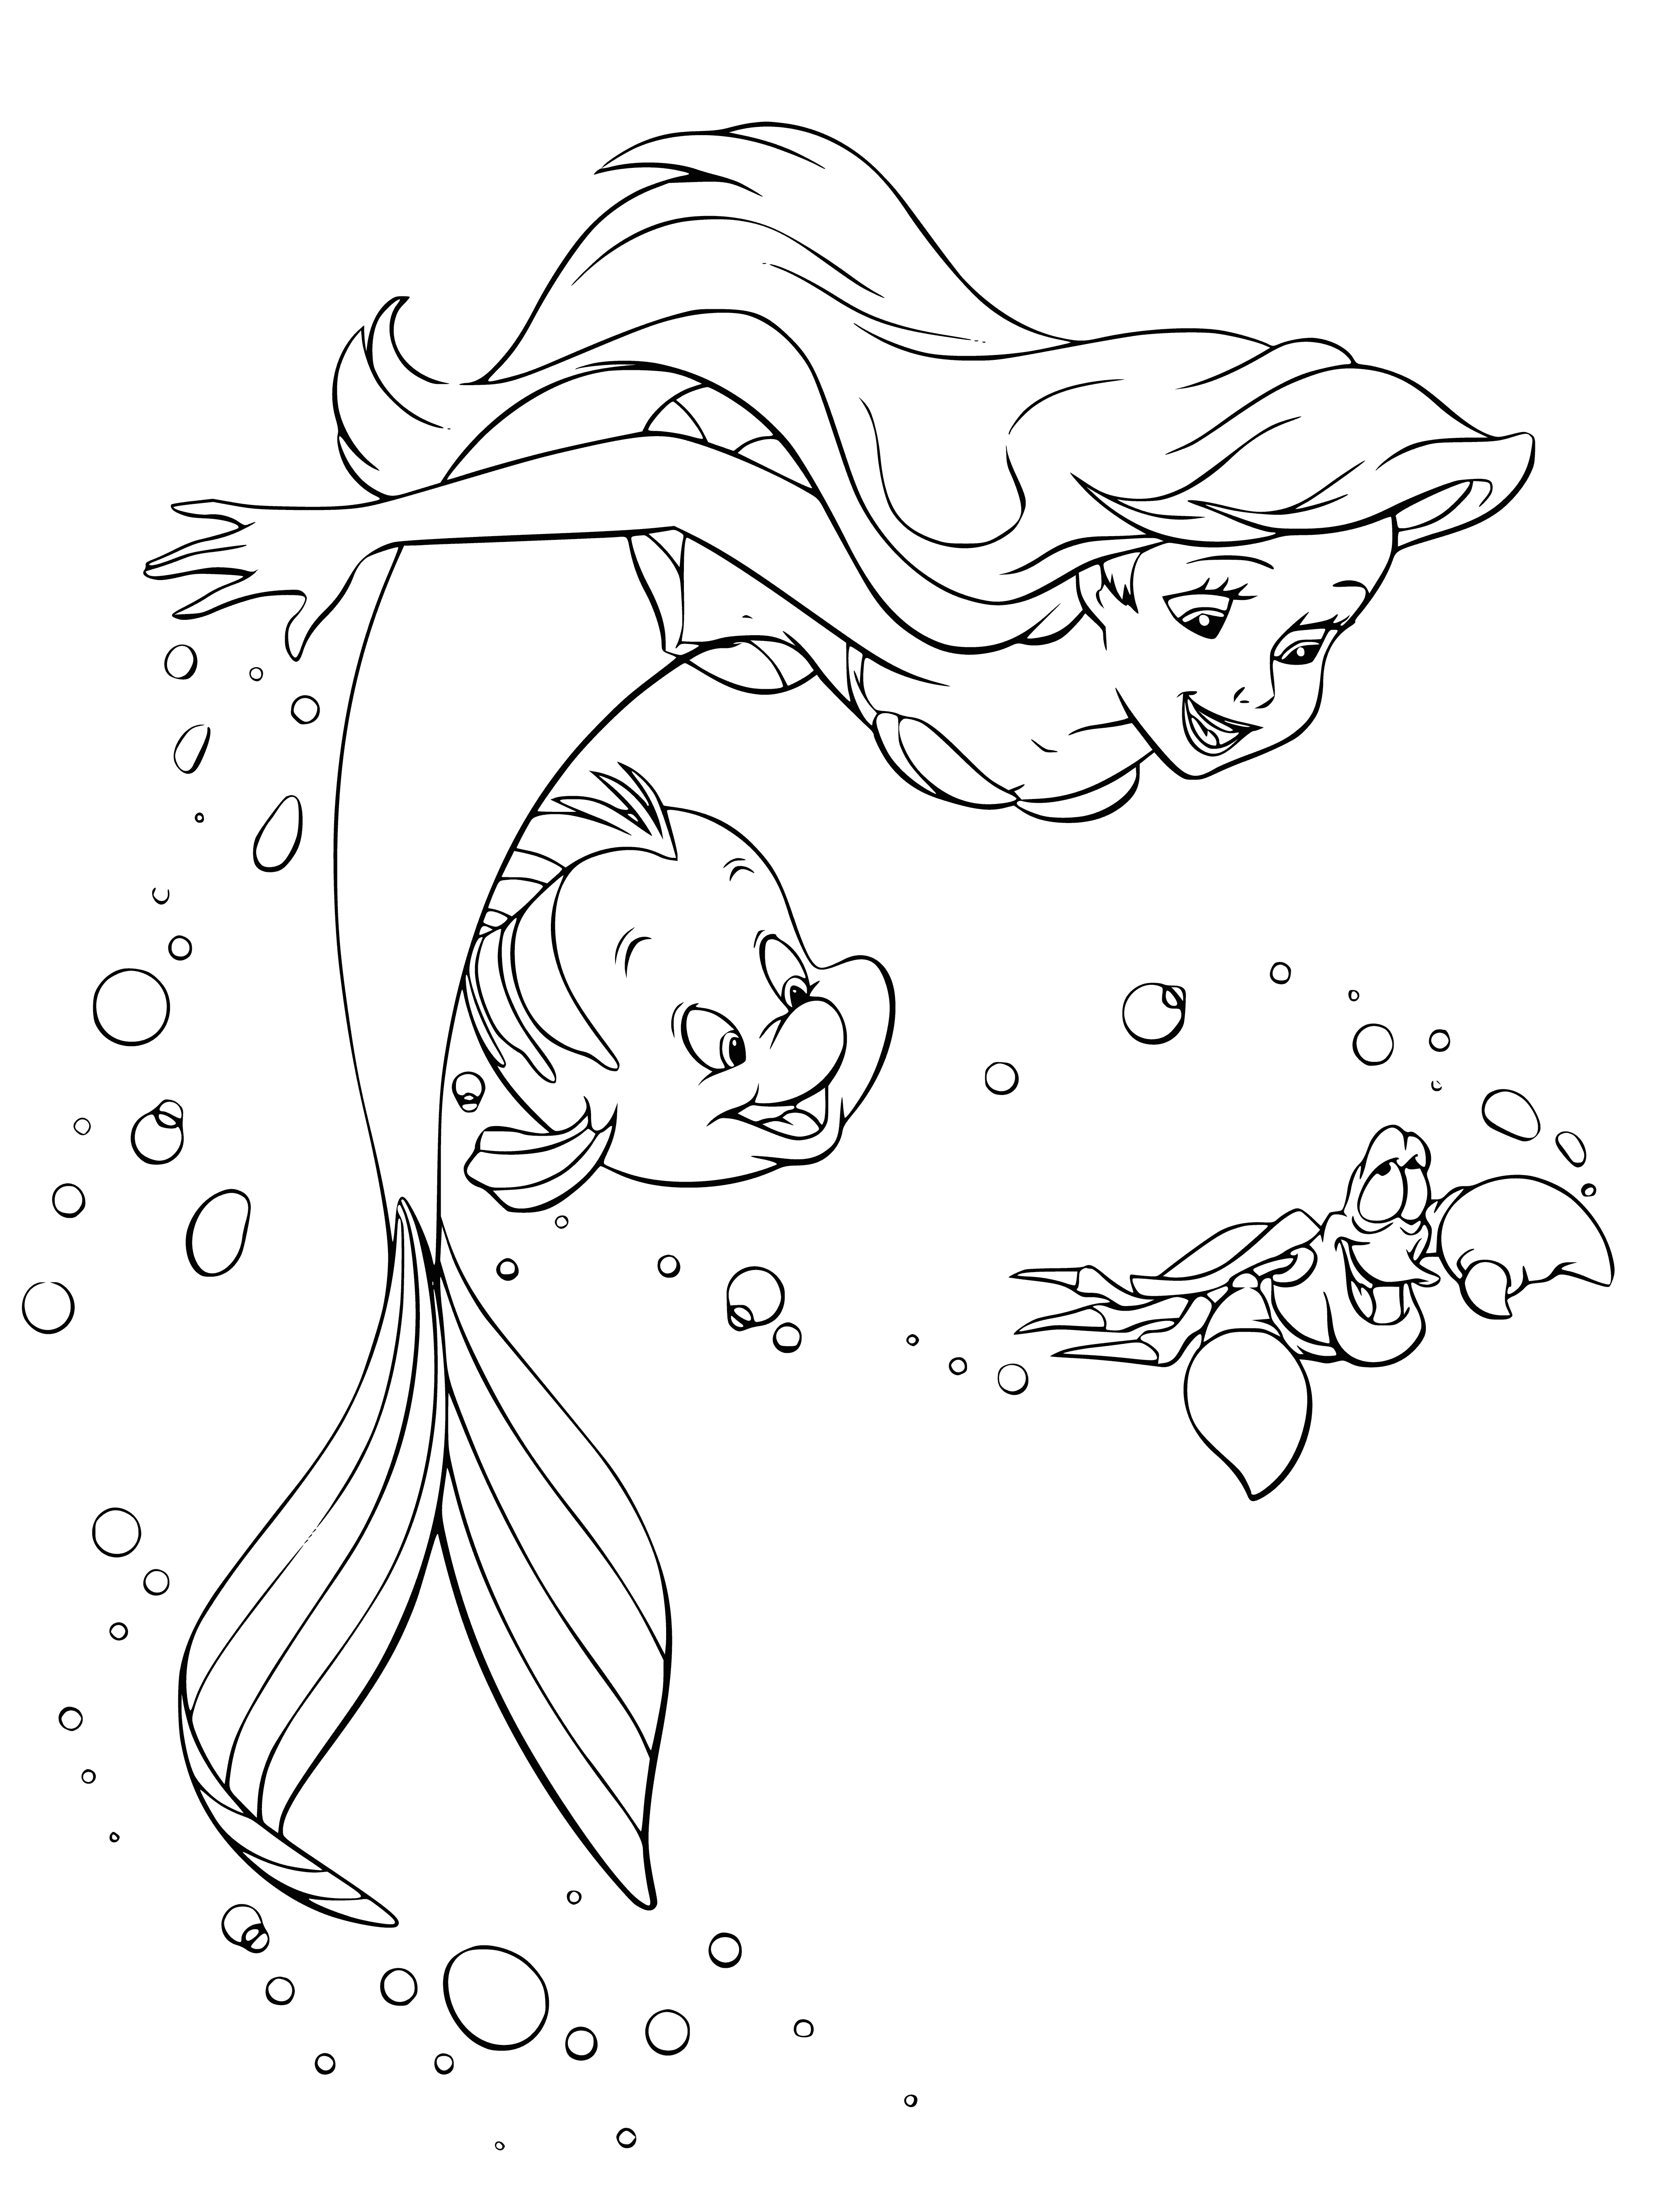 coloring page: .

Ariel listens to a conch shell with Flounder and Sebastian, all smiling. Sebastian holds his claws up in the air.